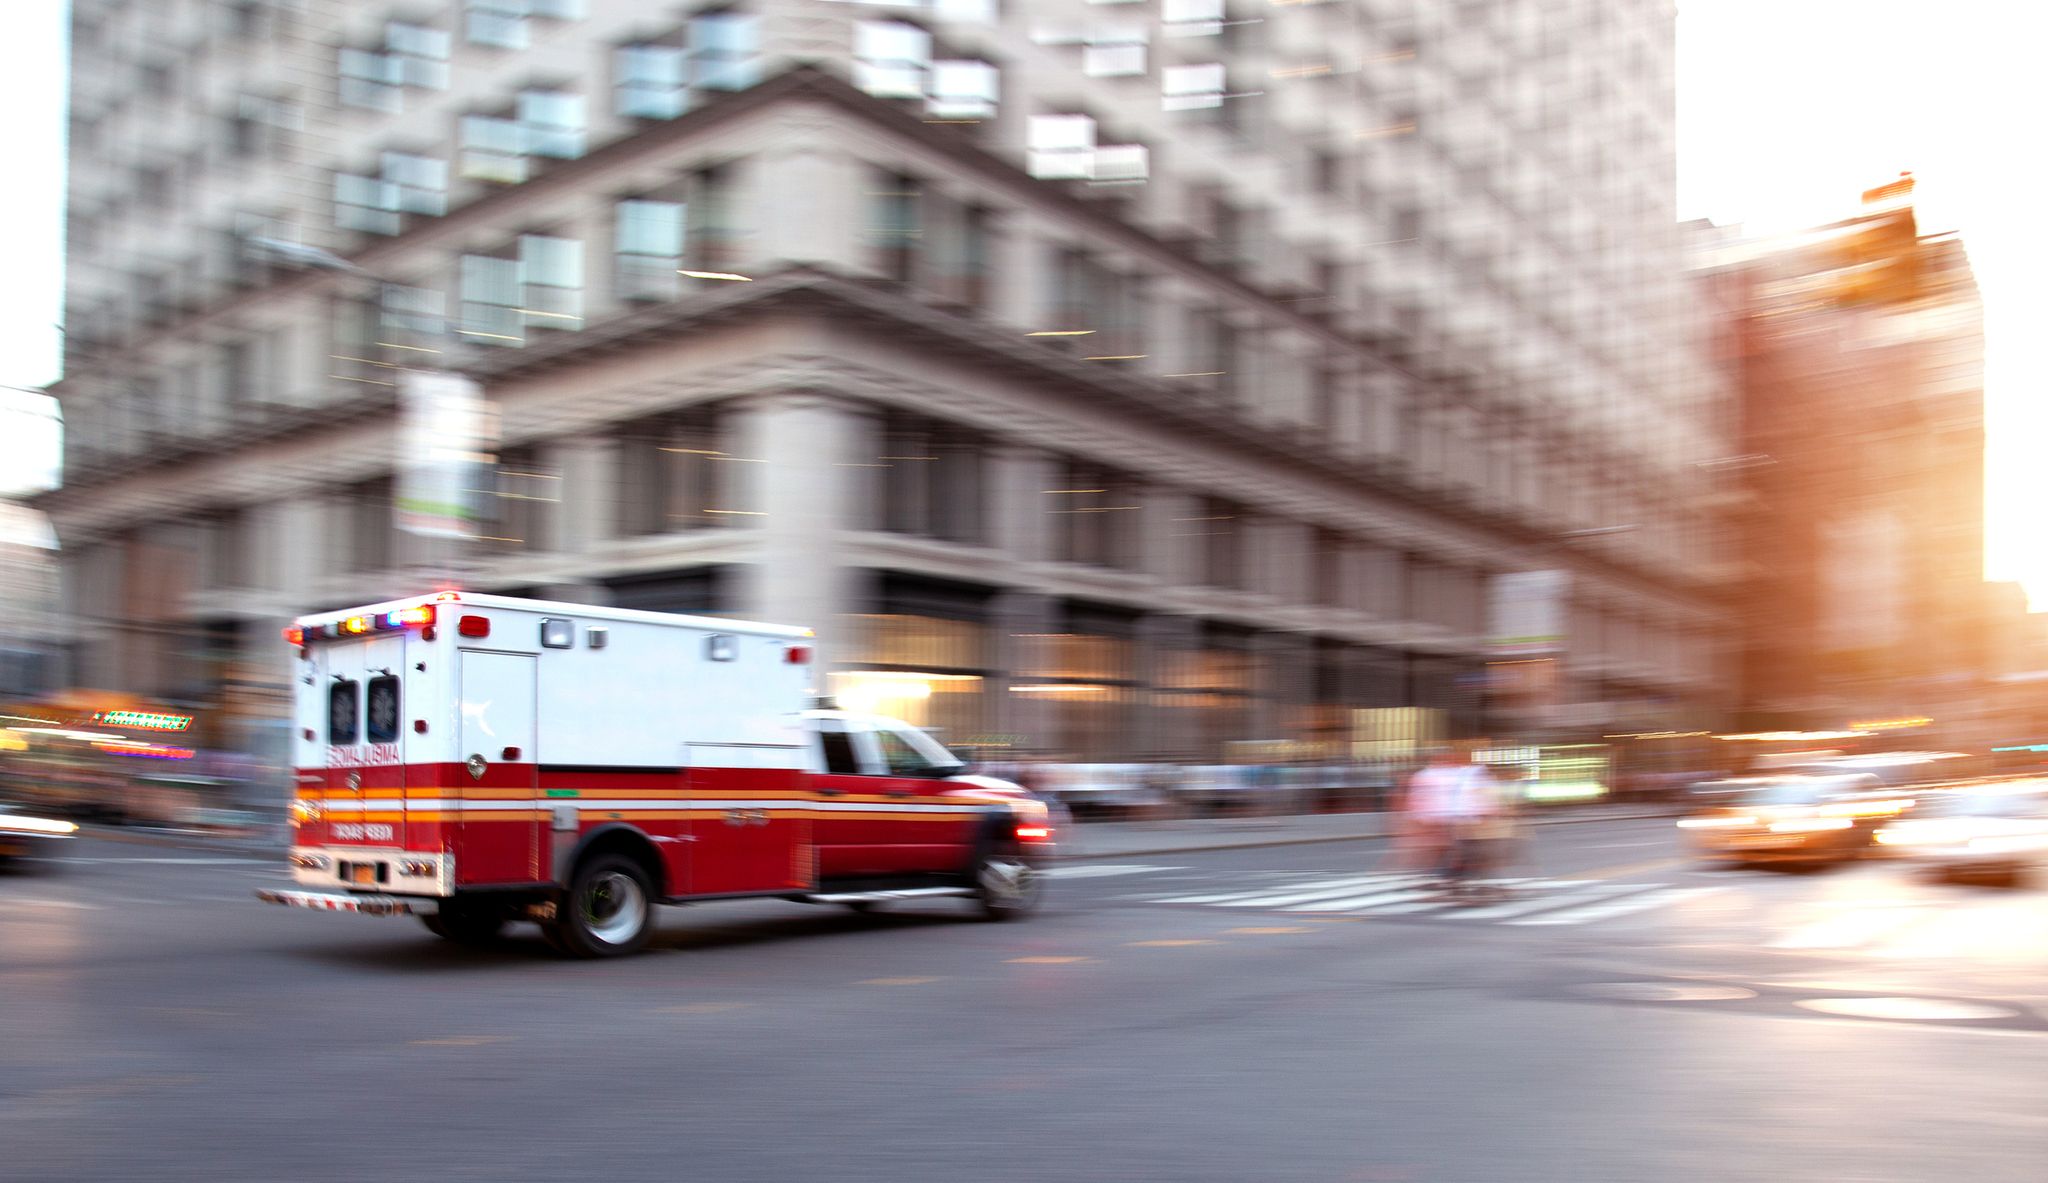 An ambulance responding to an emergency | 